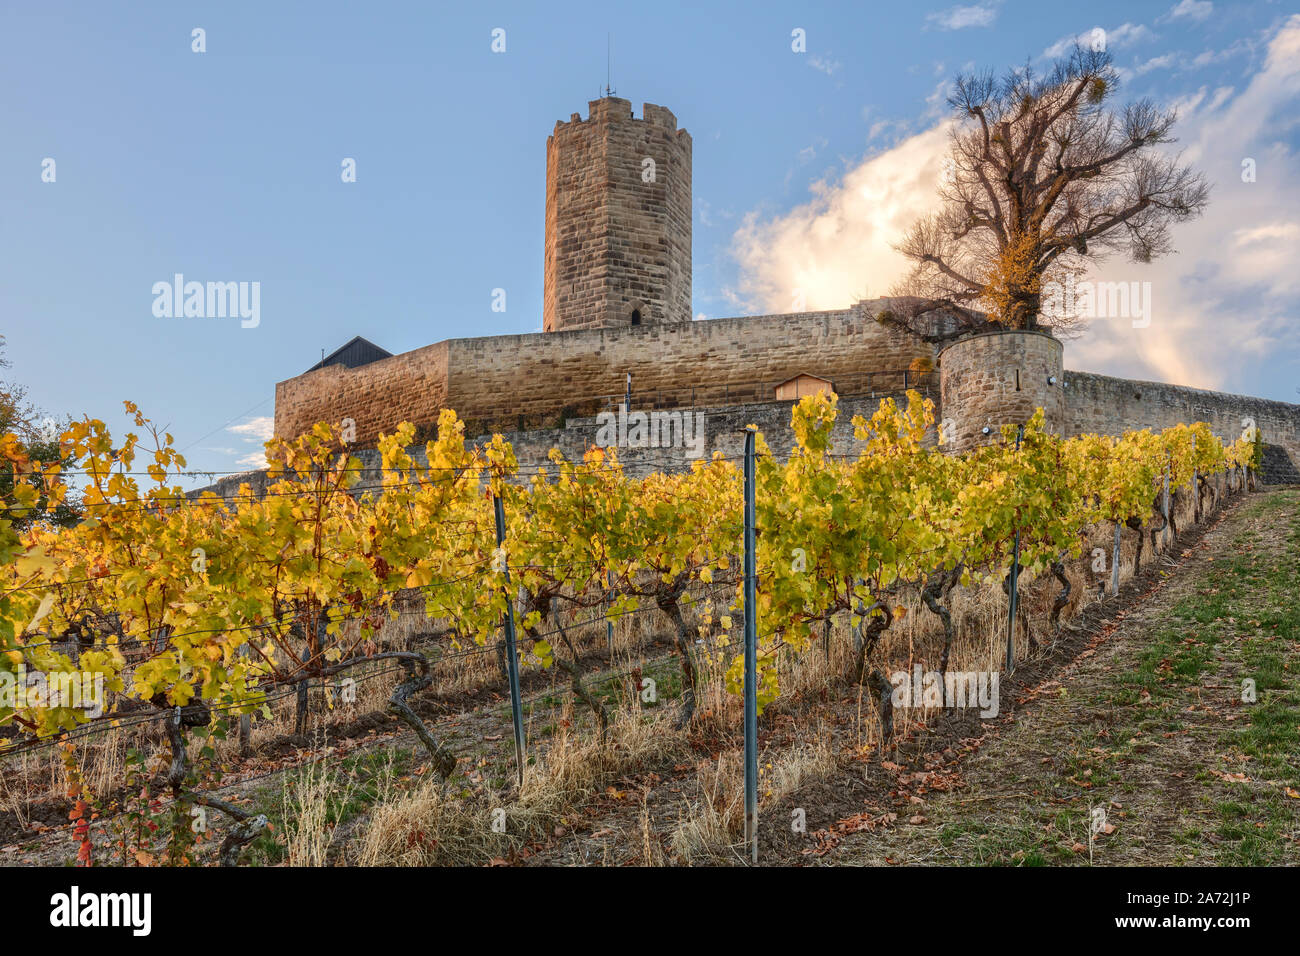 Steinsberg castle, Sinsheim, Germany, with autumn colors in the vineyard in front of it Stock Photo